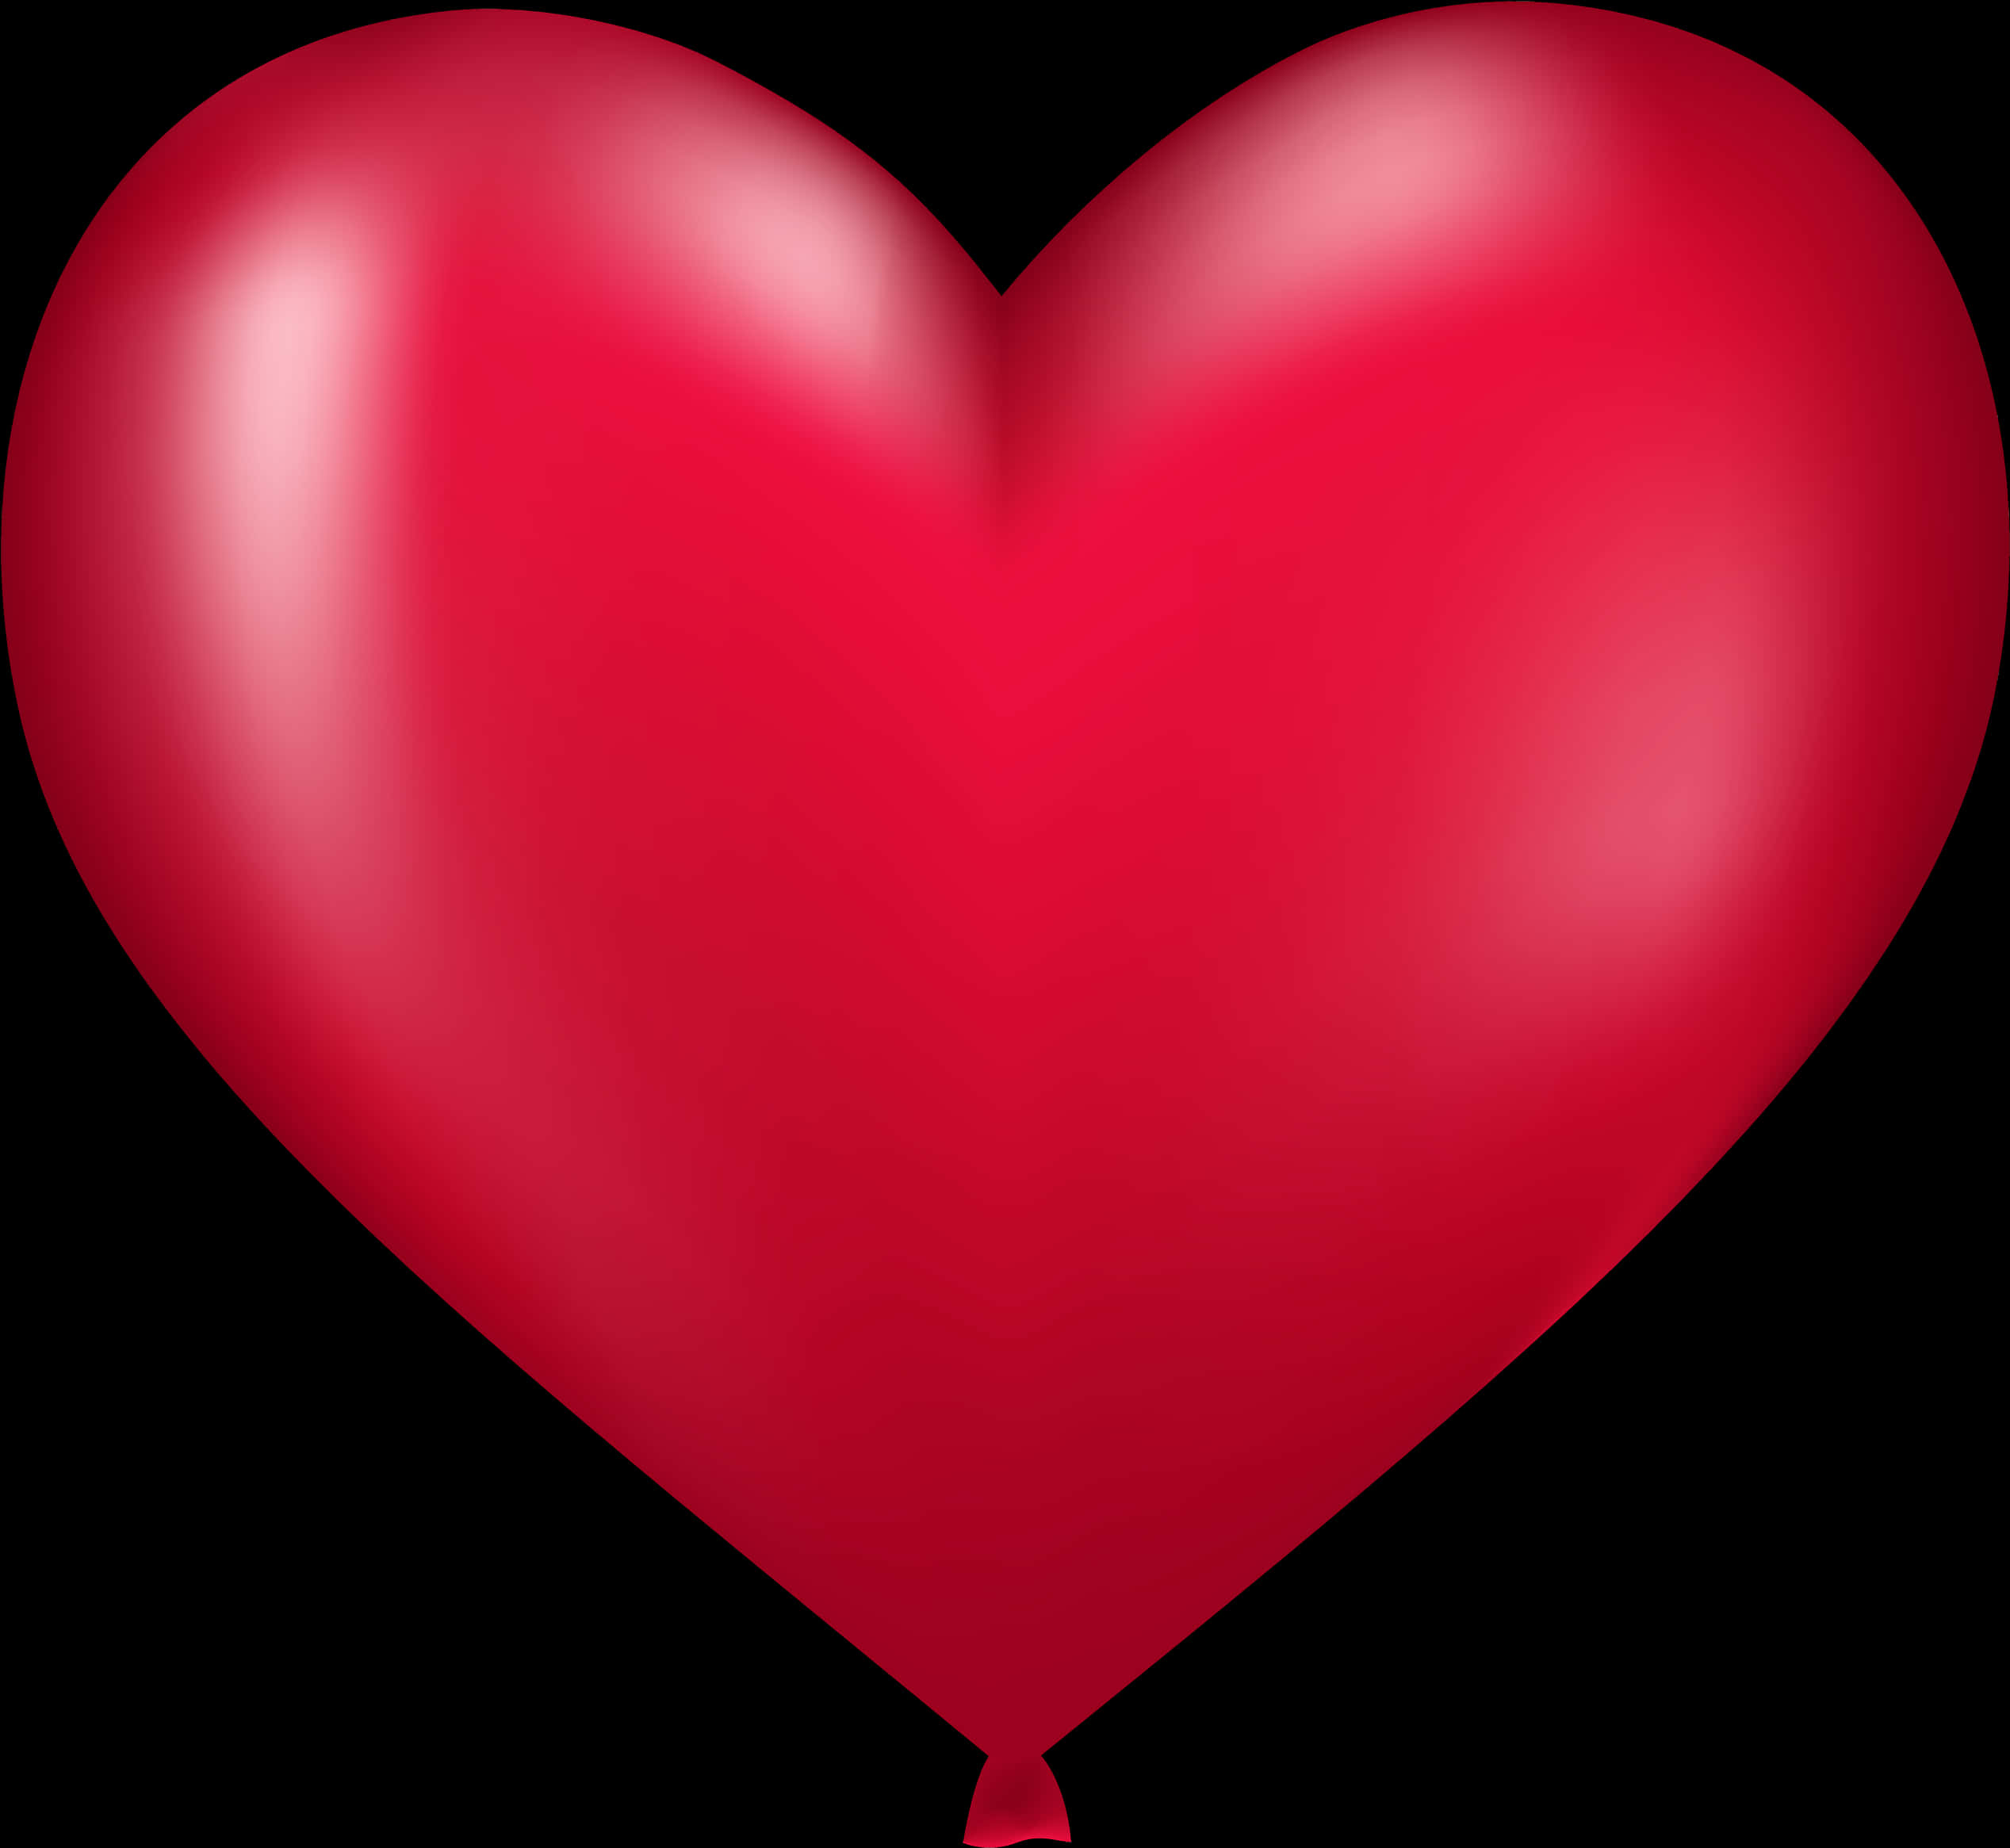 A Red Heart Shaped Balloon